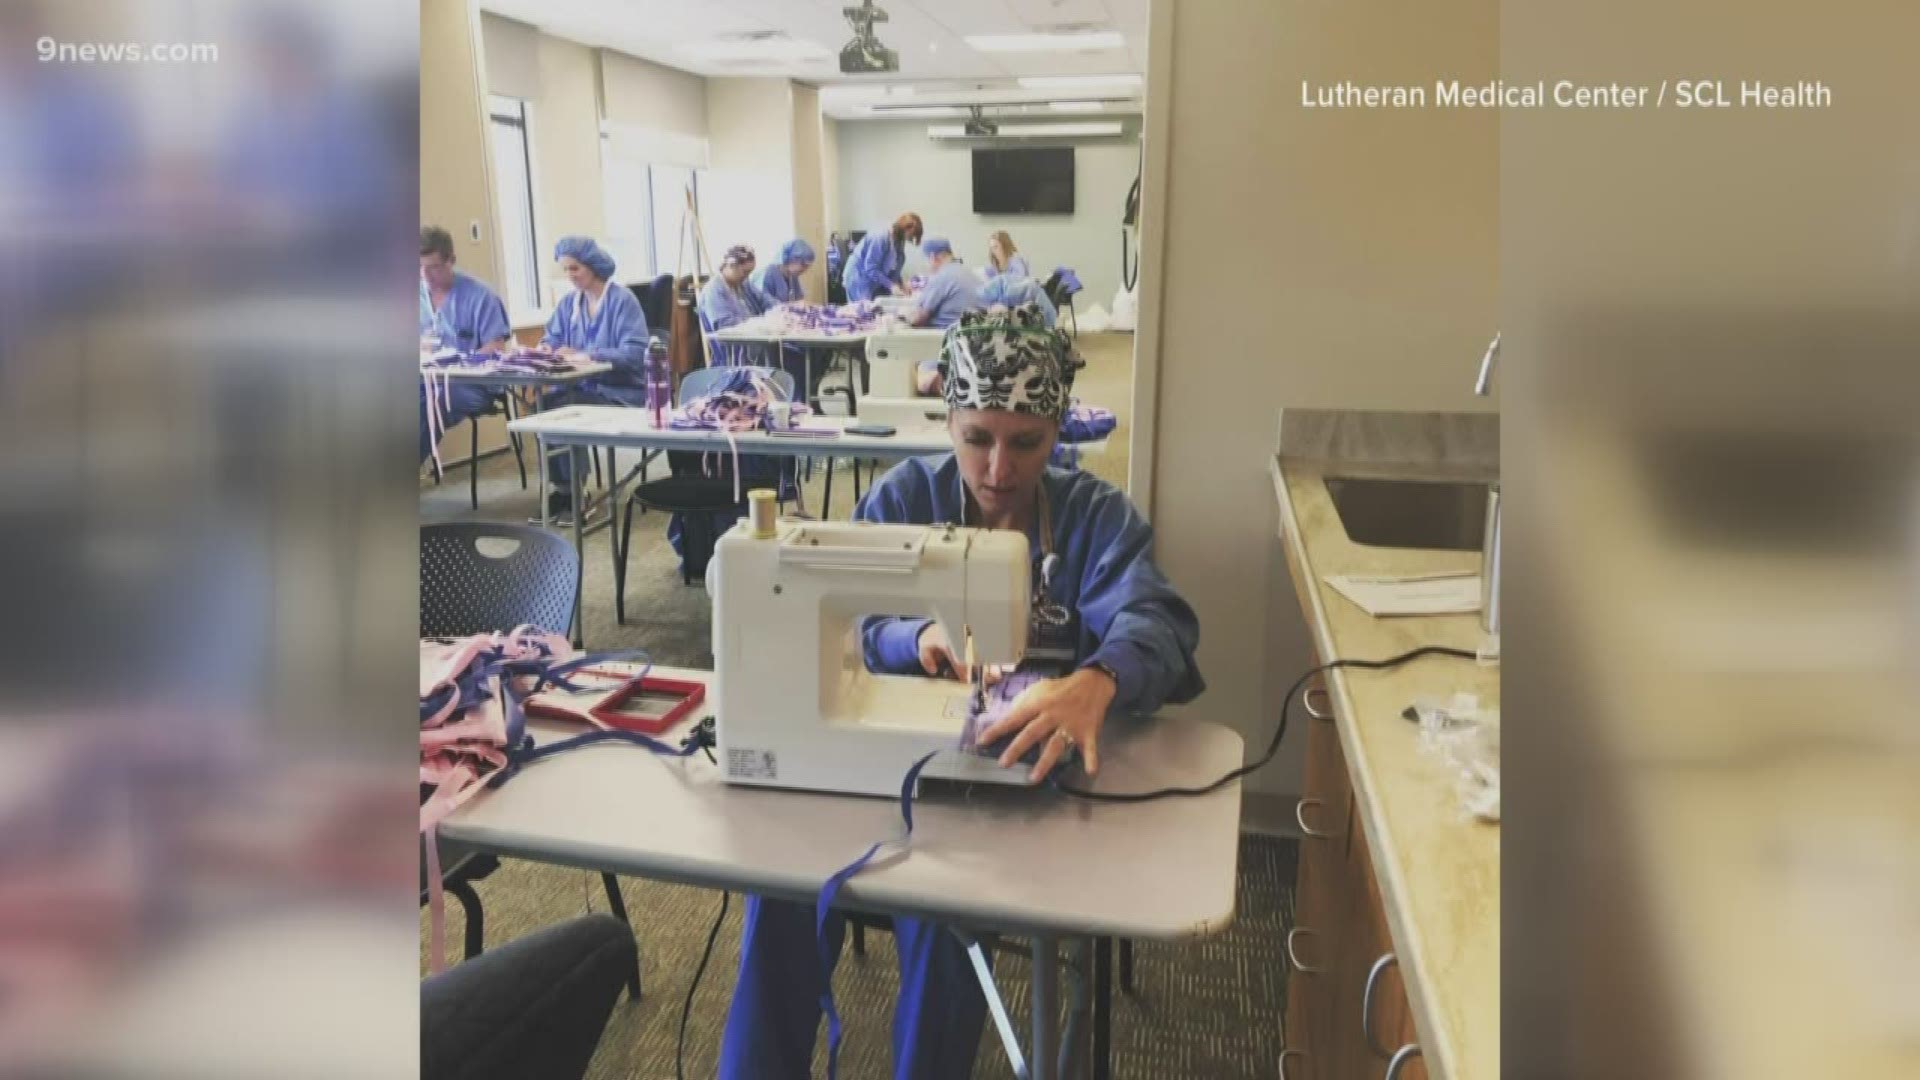 Many people have been sewing homemade masks to donate to health care providers. While well-intentioned, most hospitals won't accept those donations.